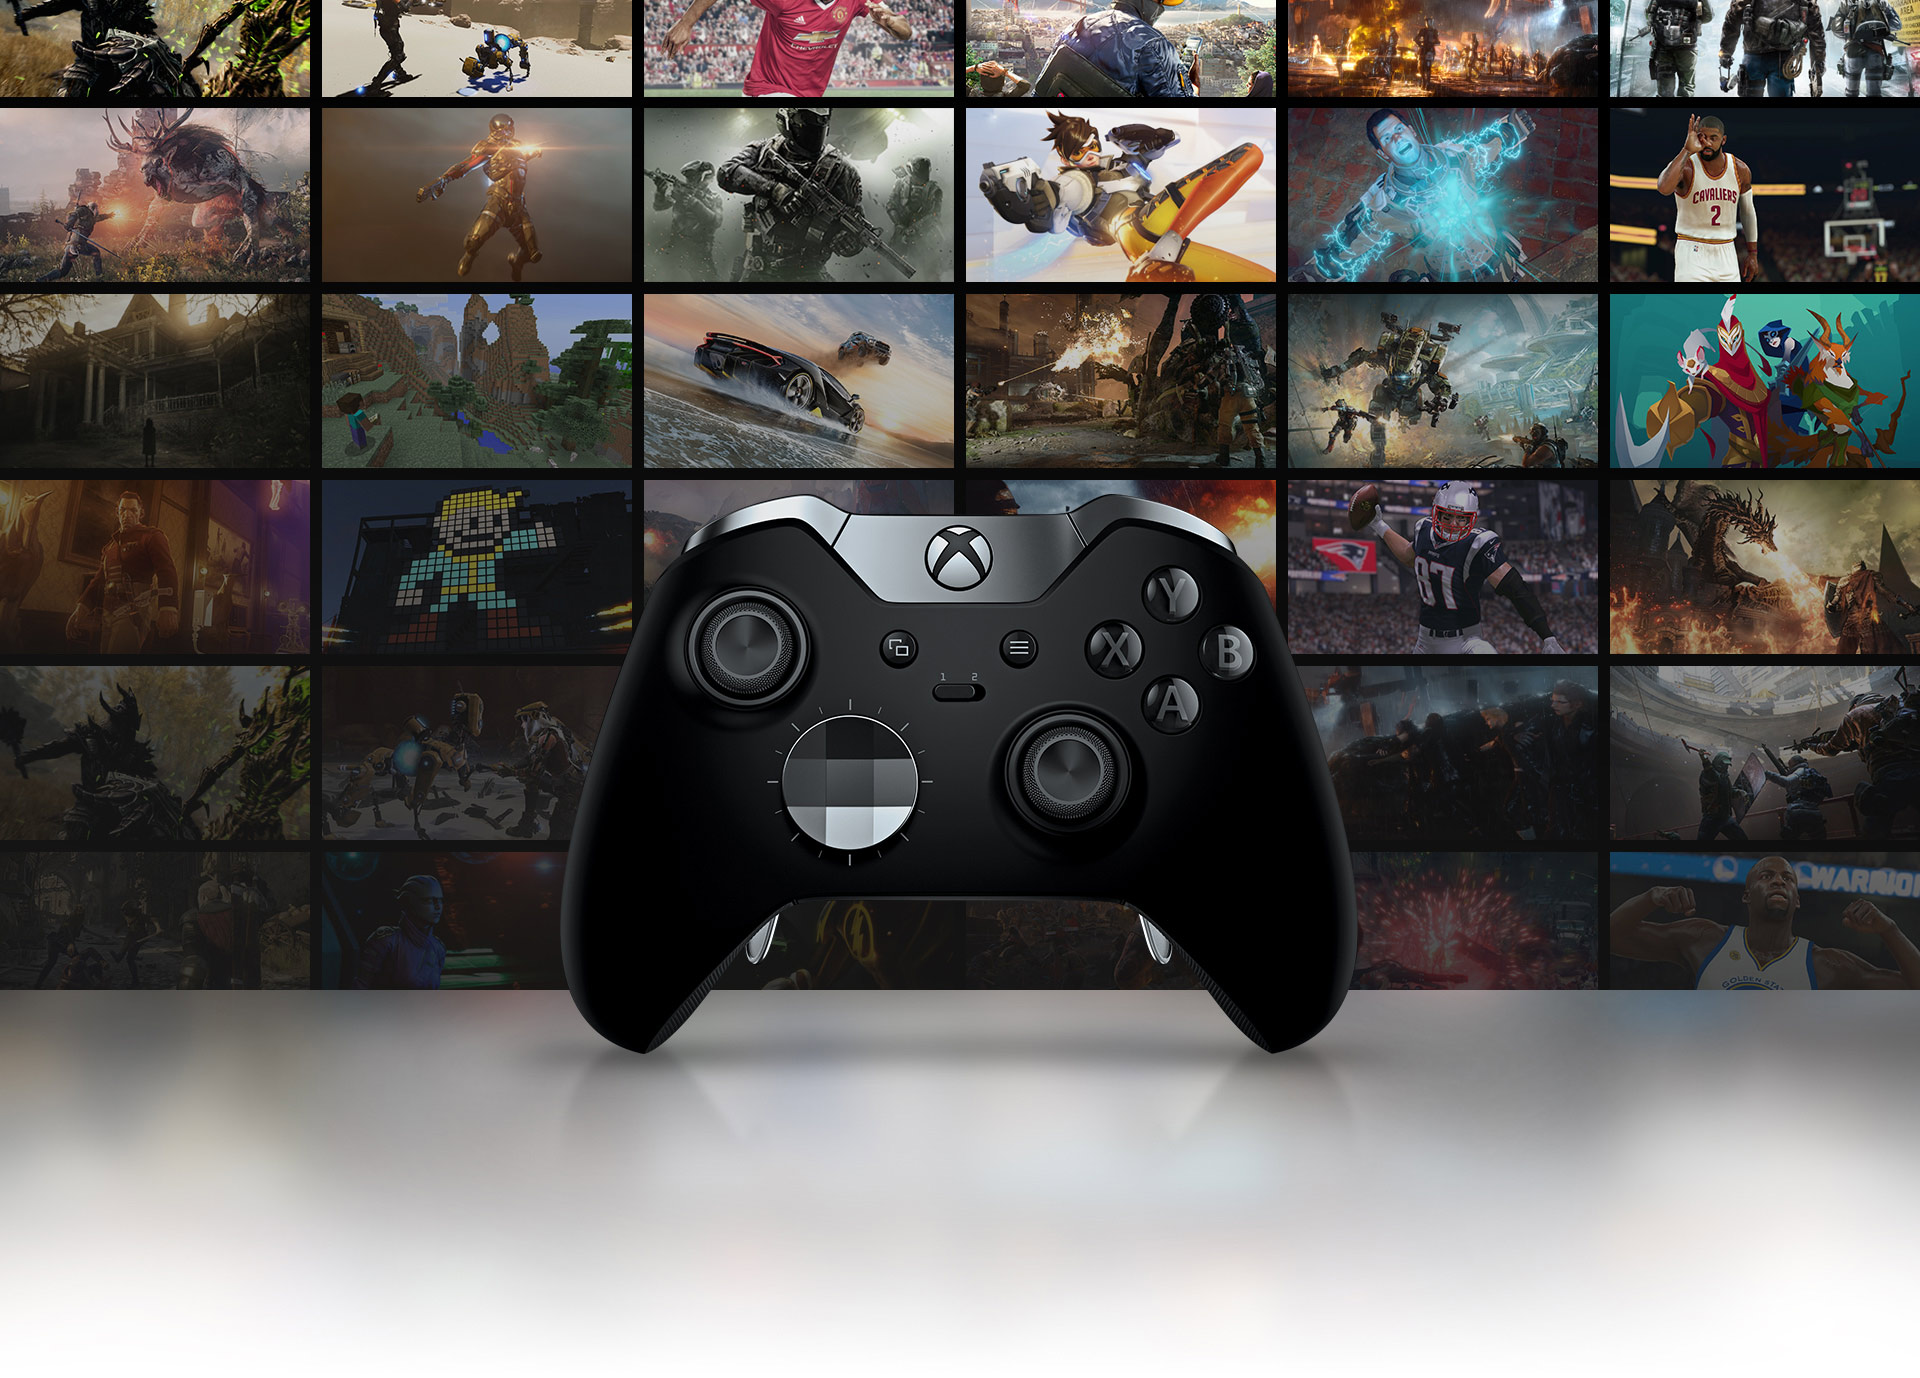 Elite Controller with screenshots for games as the background